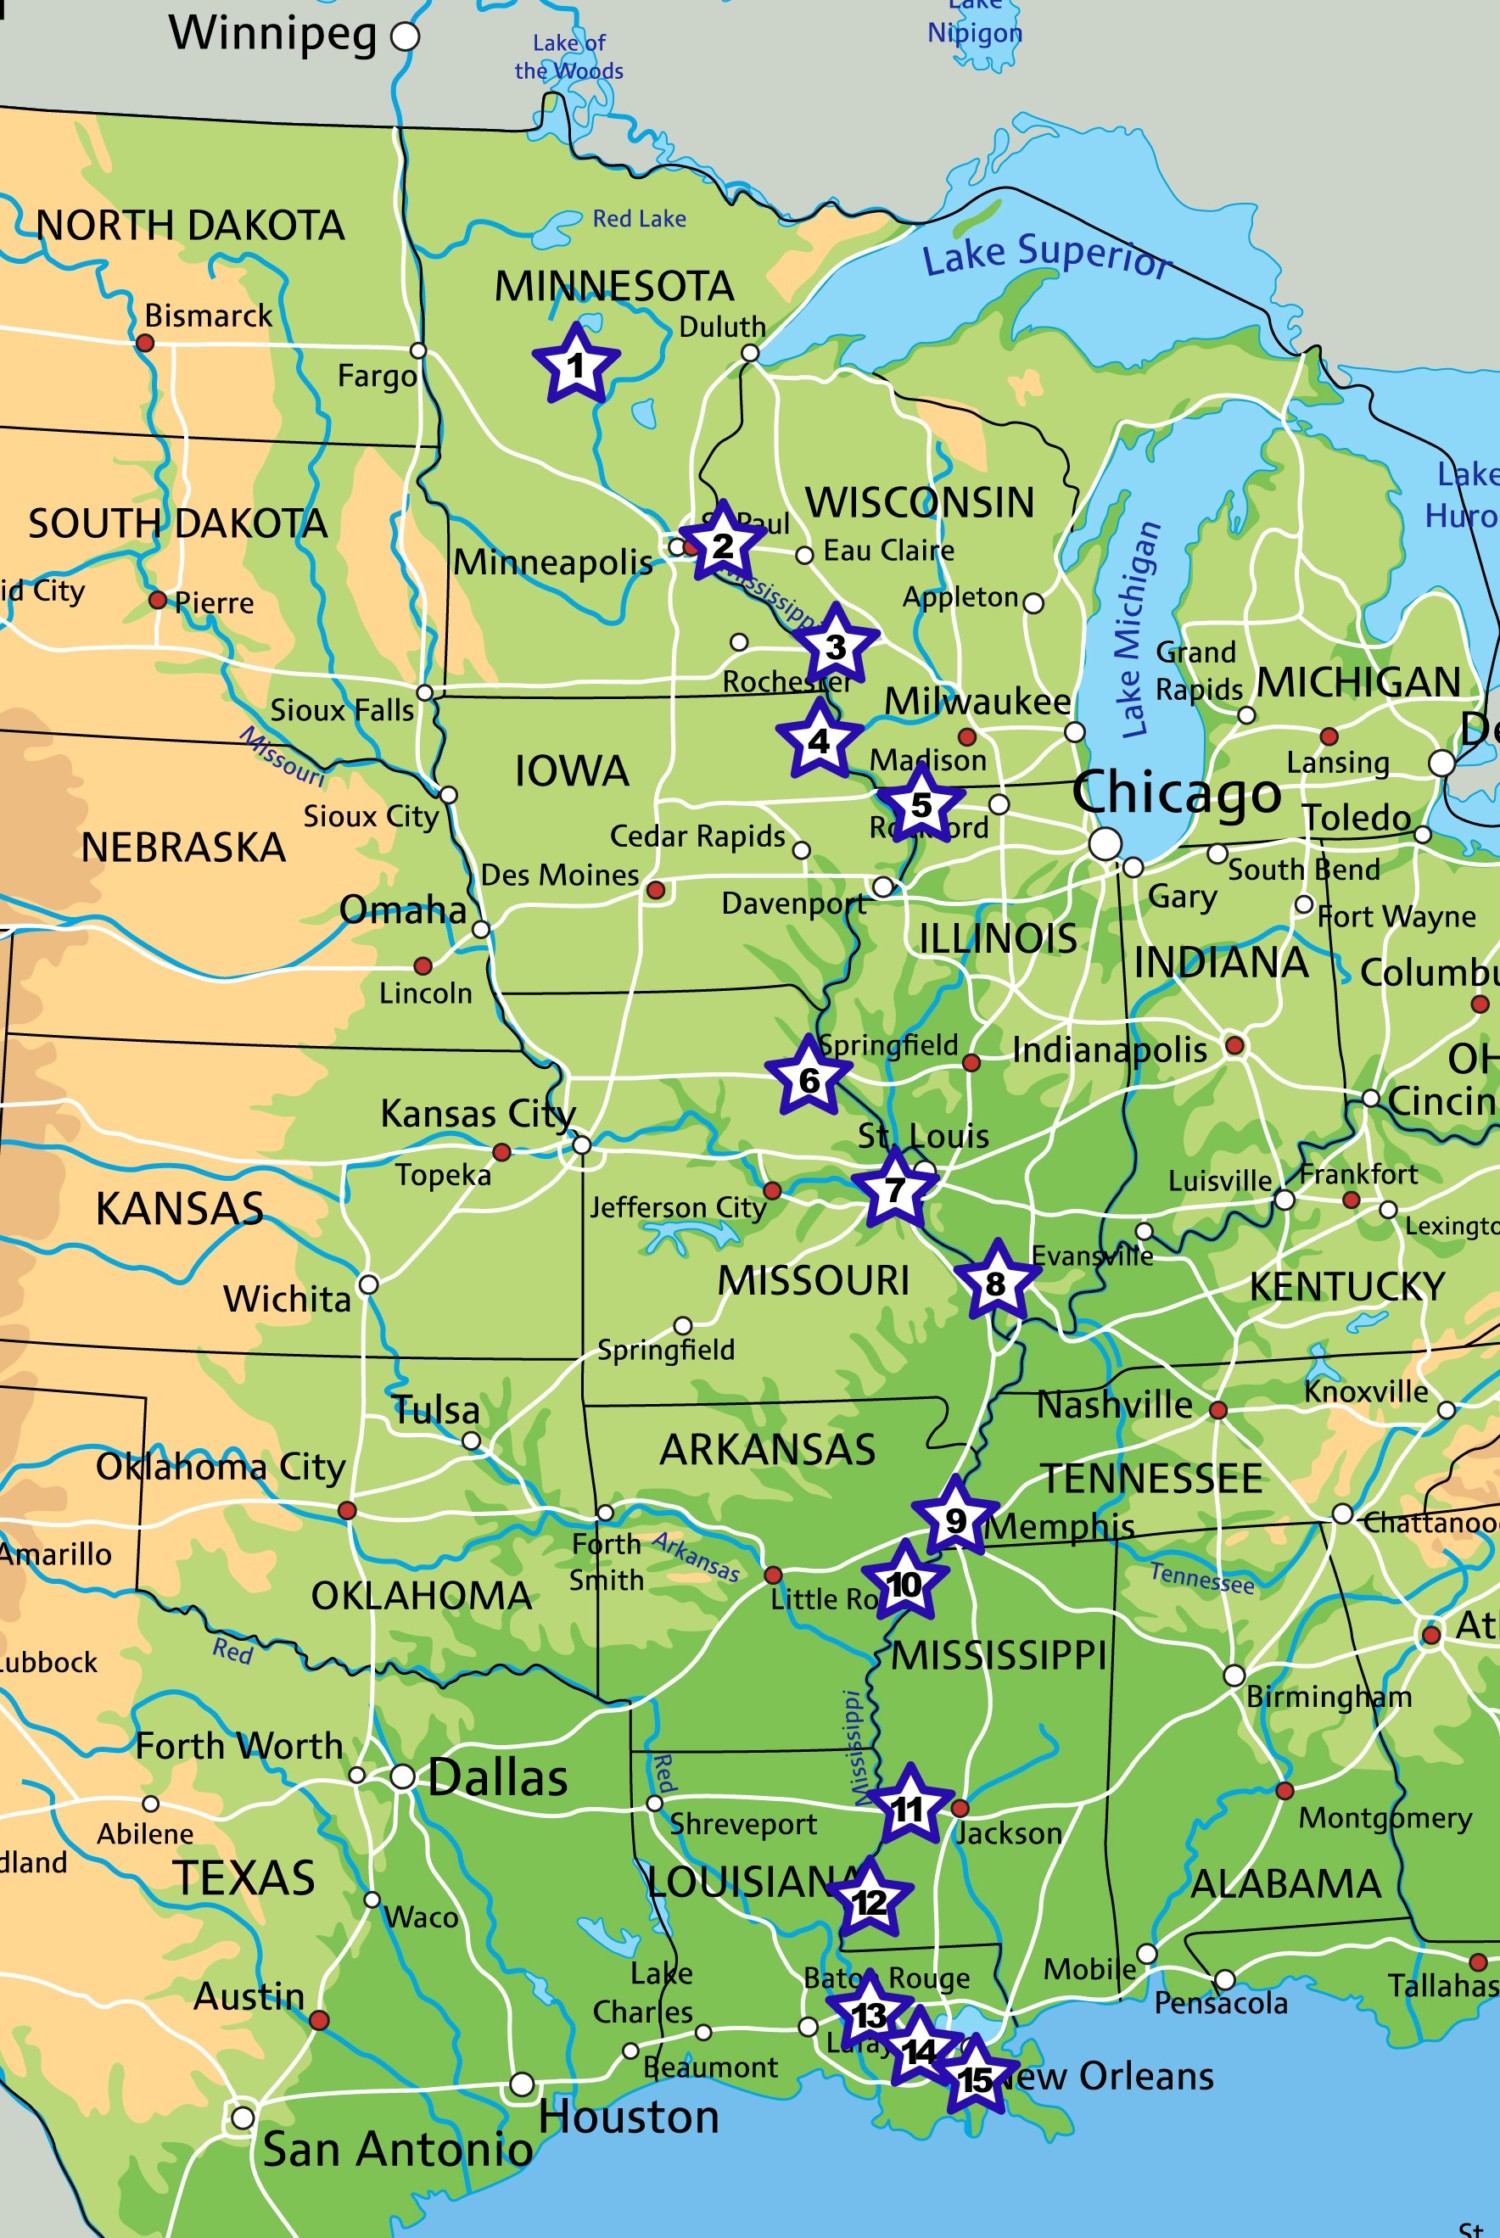 Map showing 15 pet friendly stops along the Great River Road from Minneapolis to New Orleans